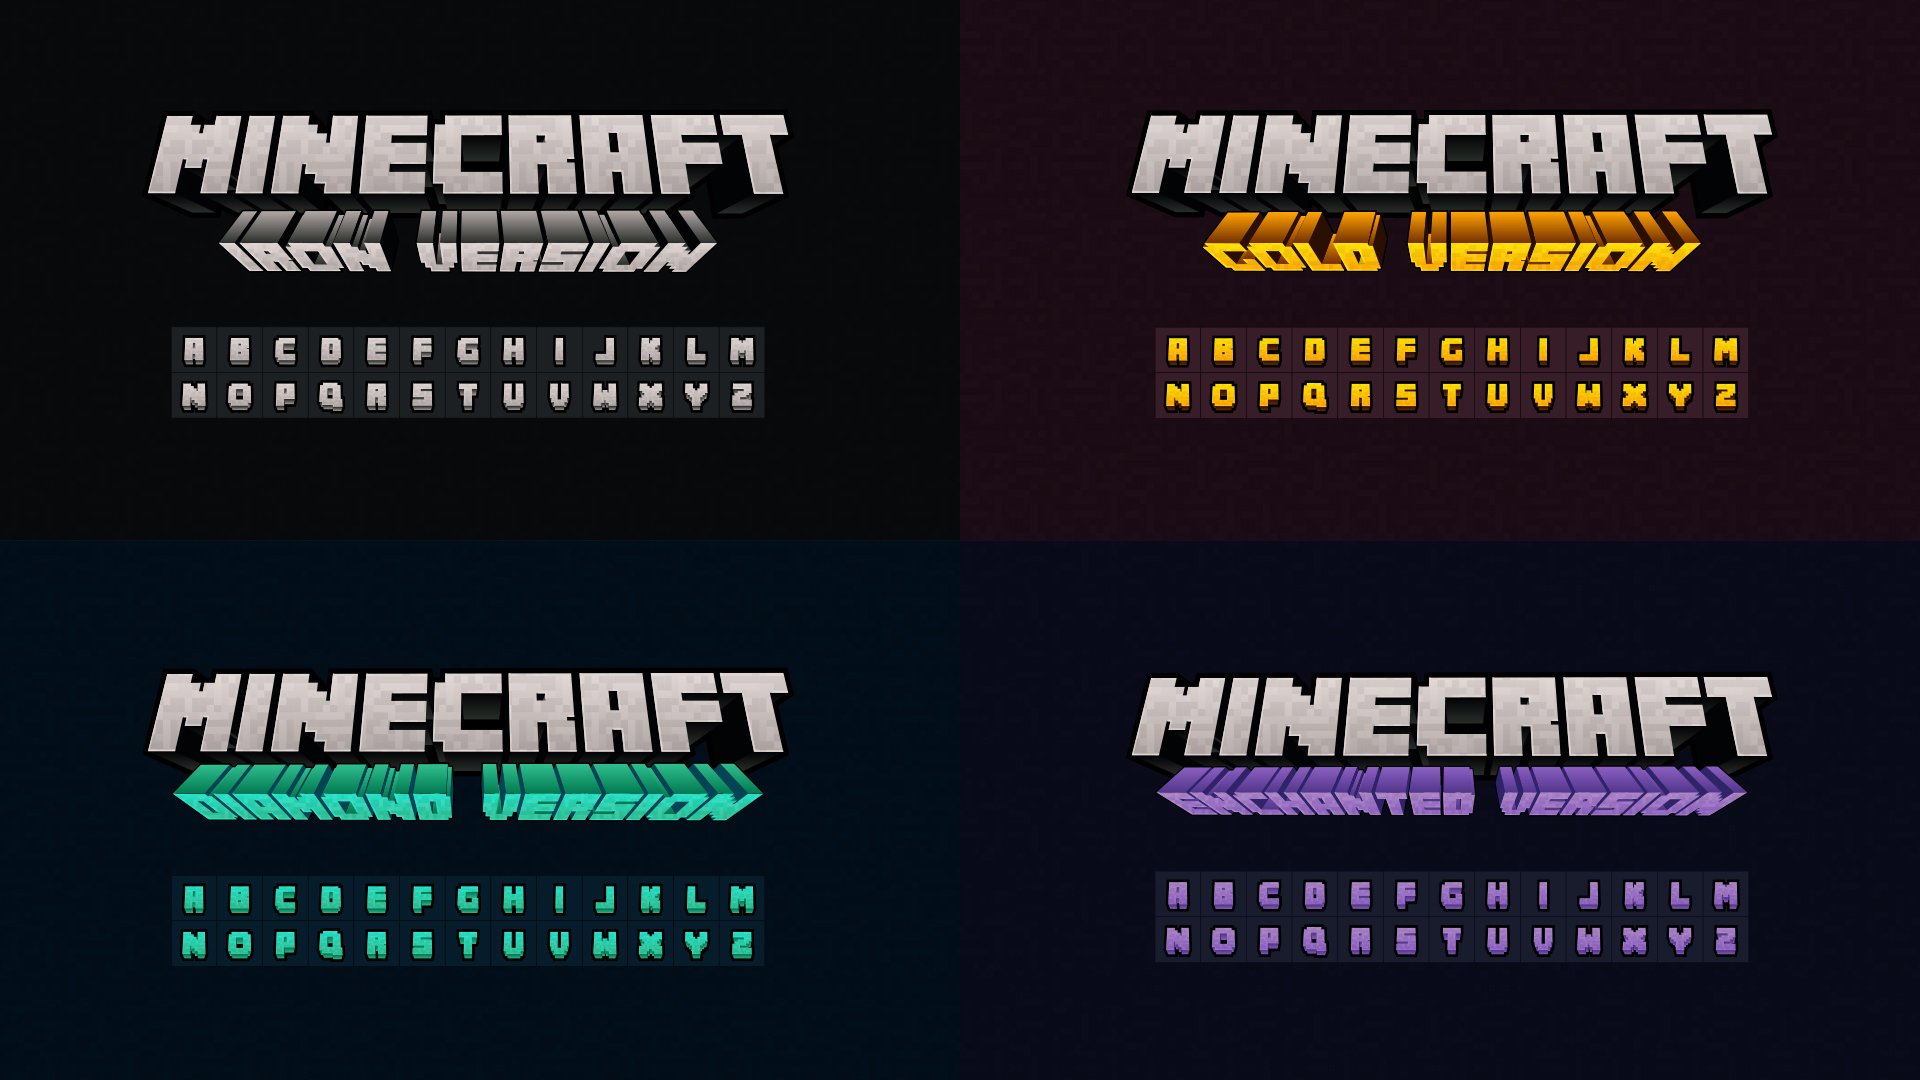 minecraft text art copy and paste